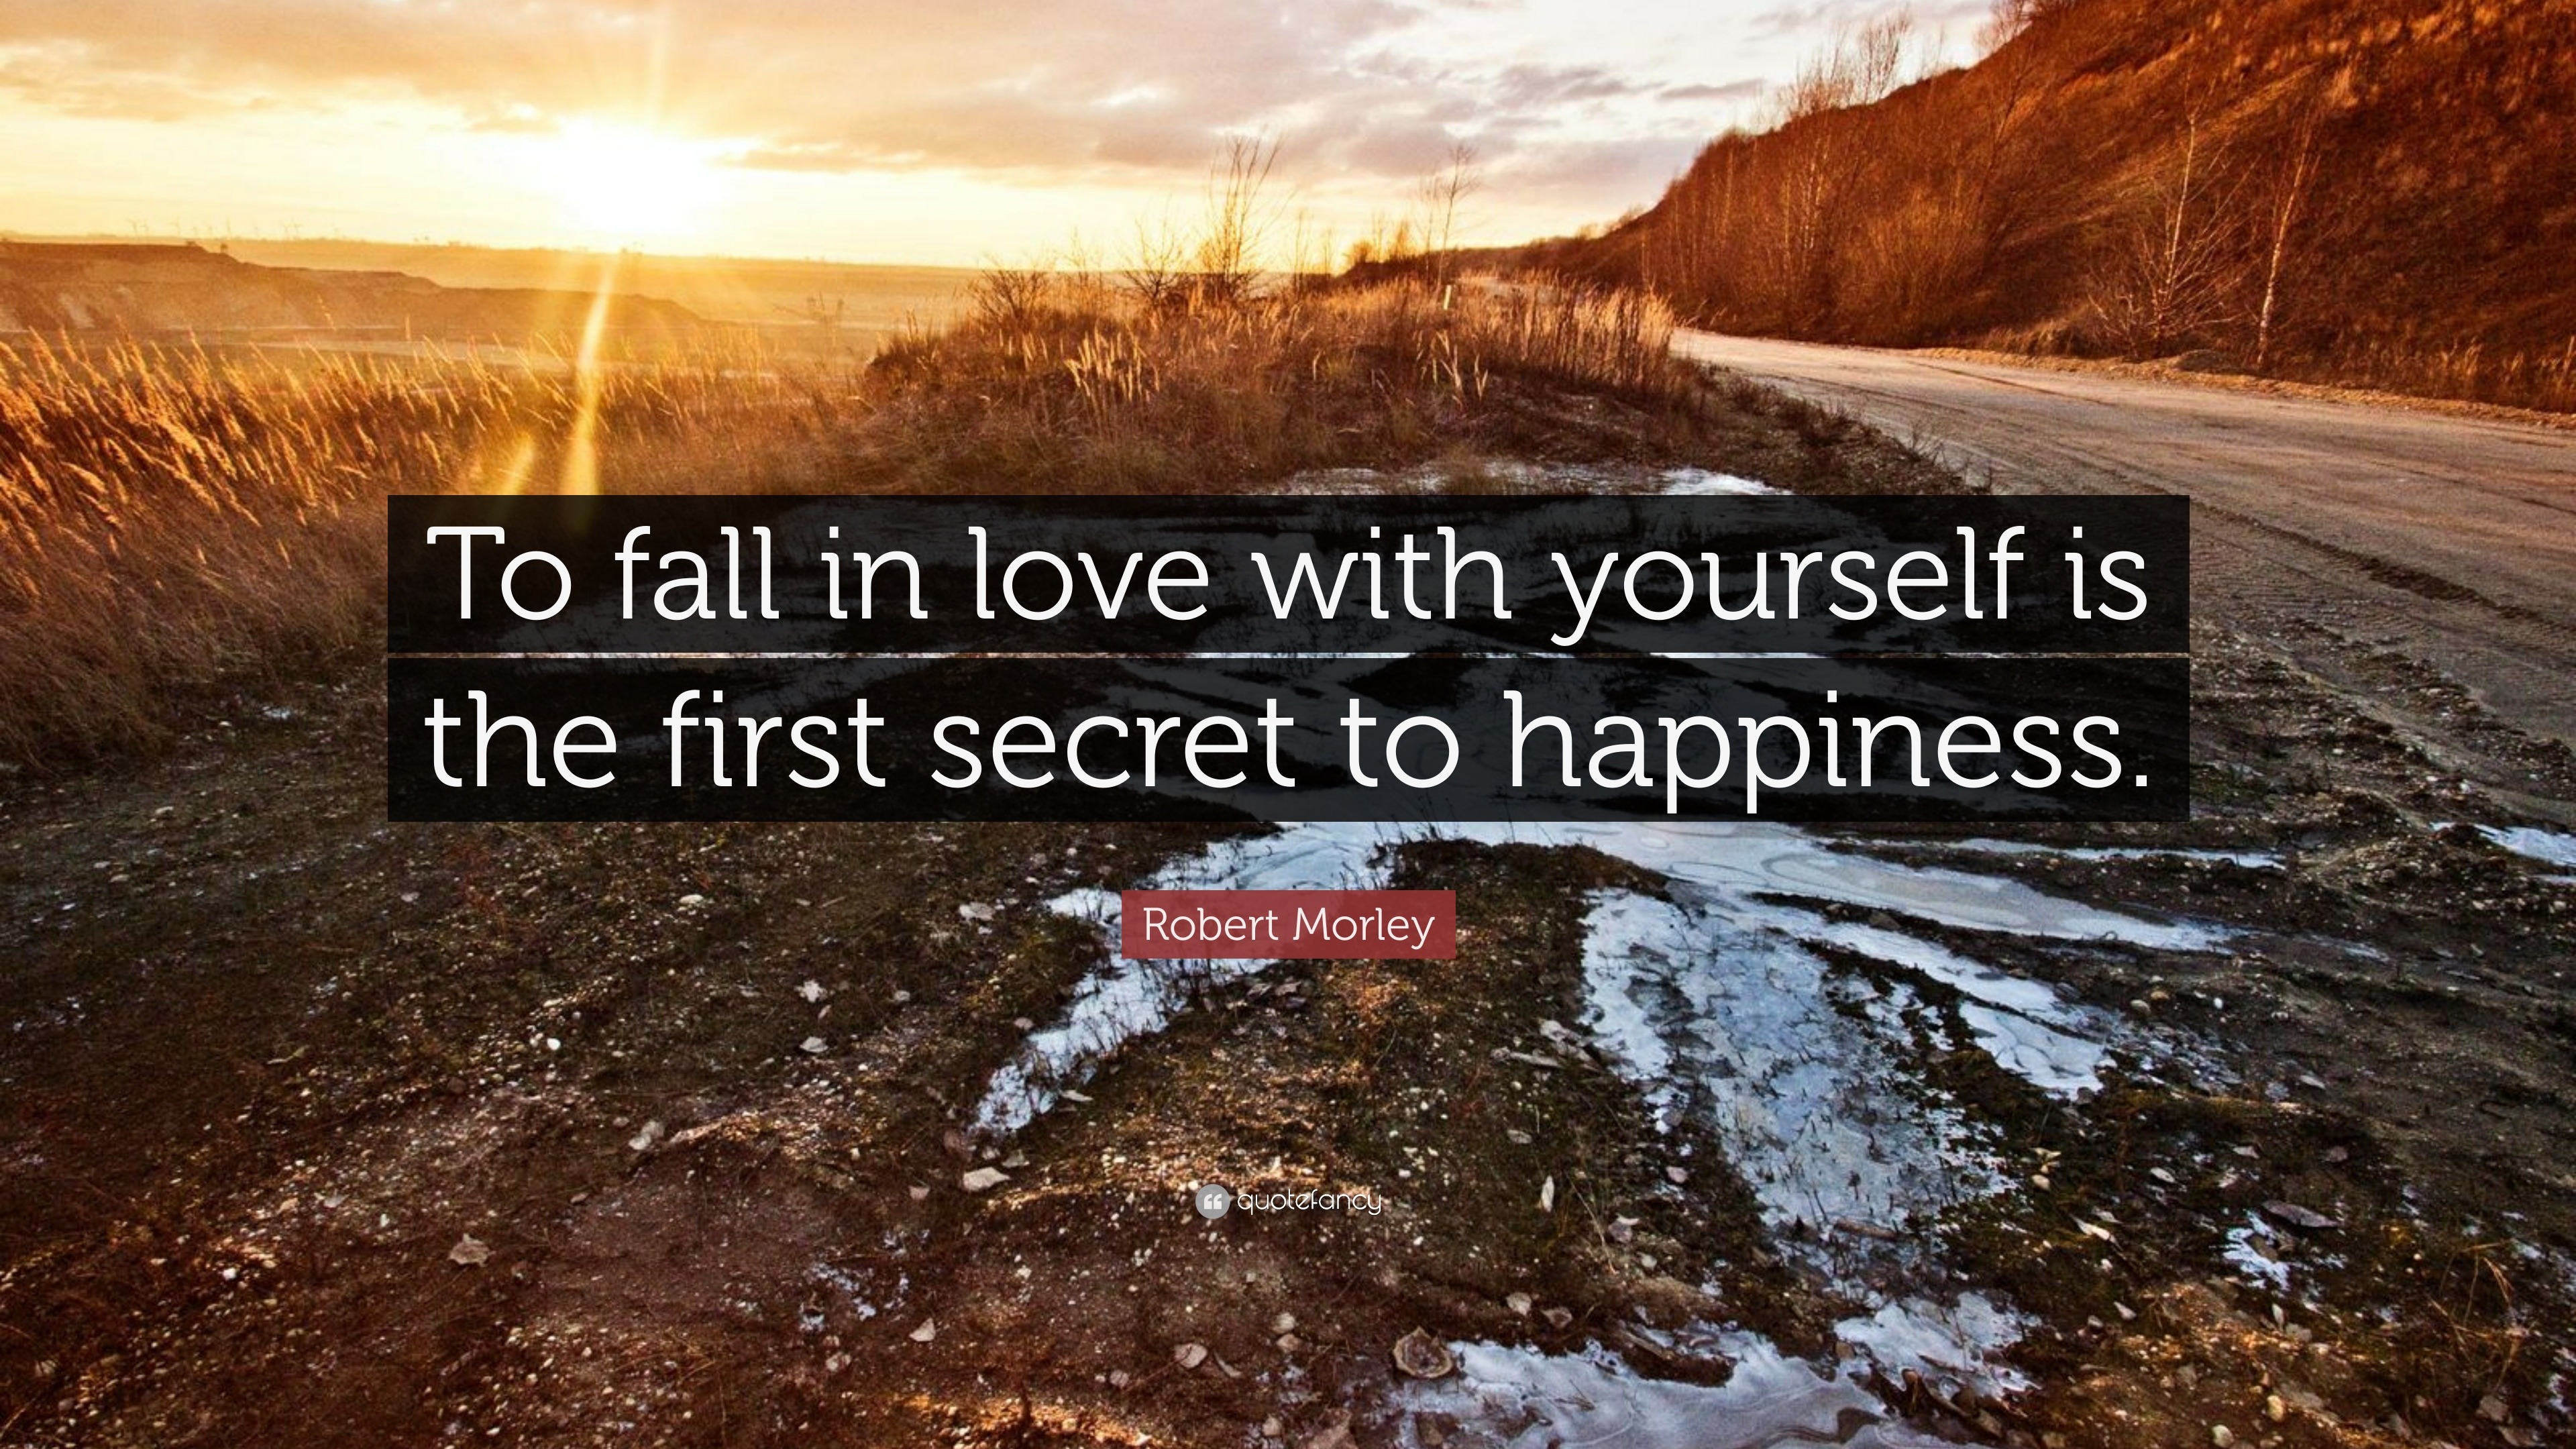 Fall to about in starting love quotes 14 Romantic